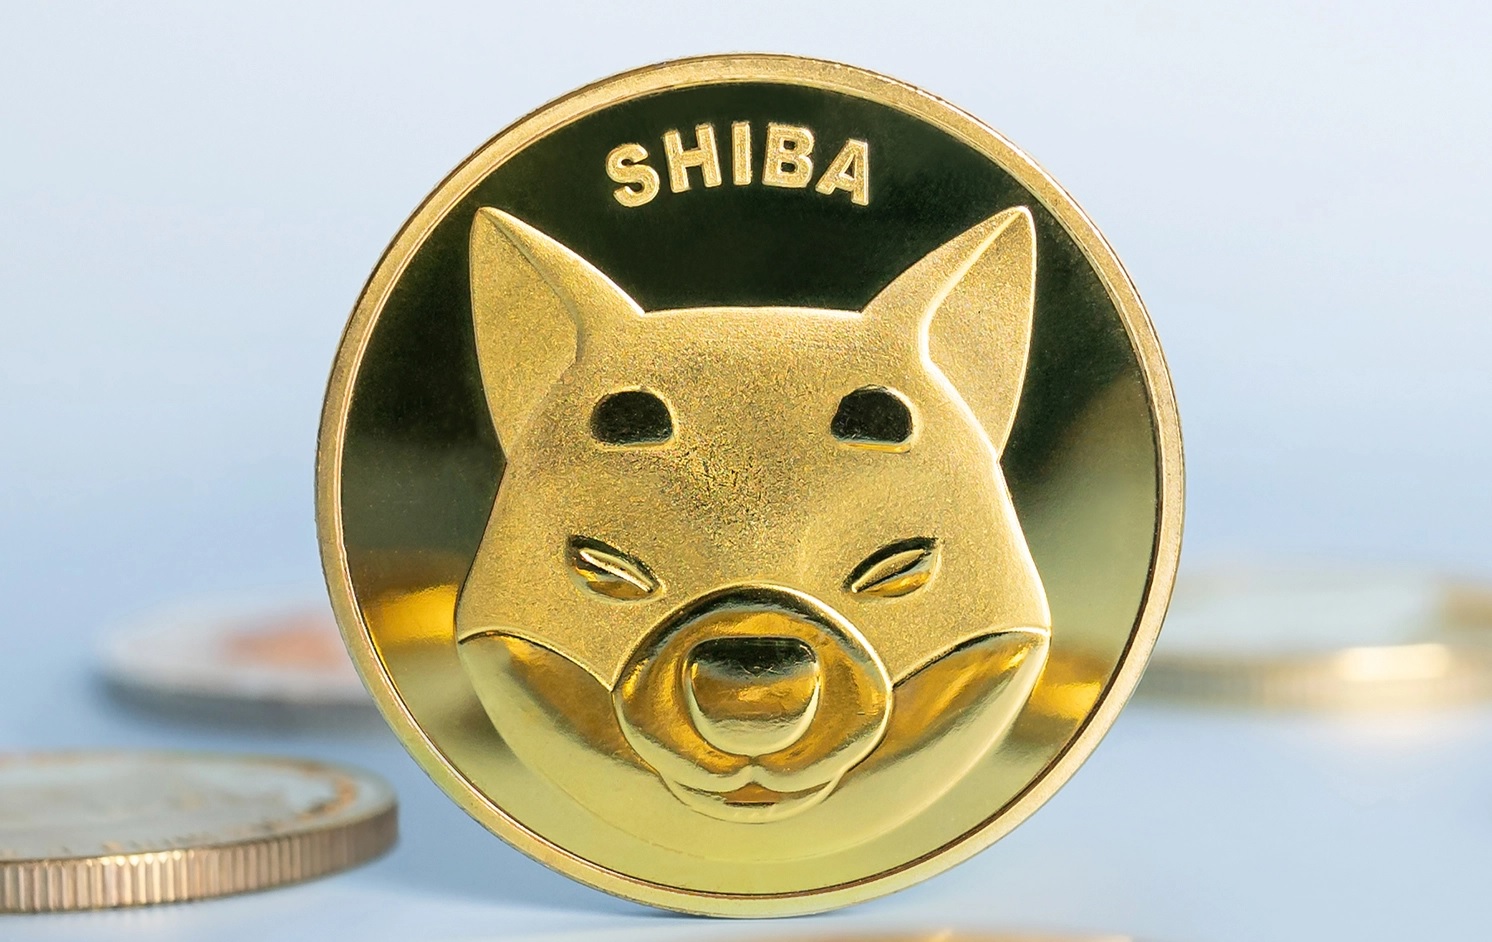 Shiba Inu (SHIB) leads other meme coins in gains as the crypto market opens Monday on the rise